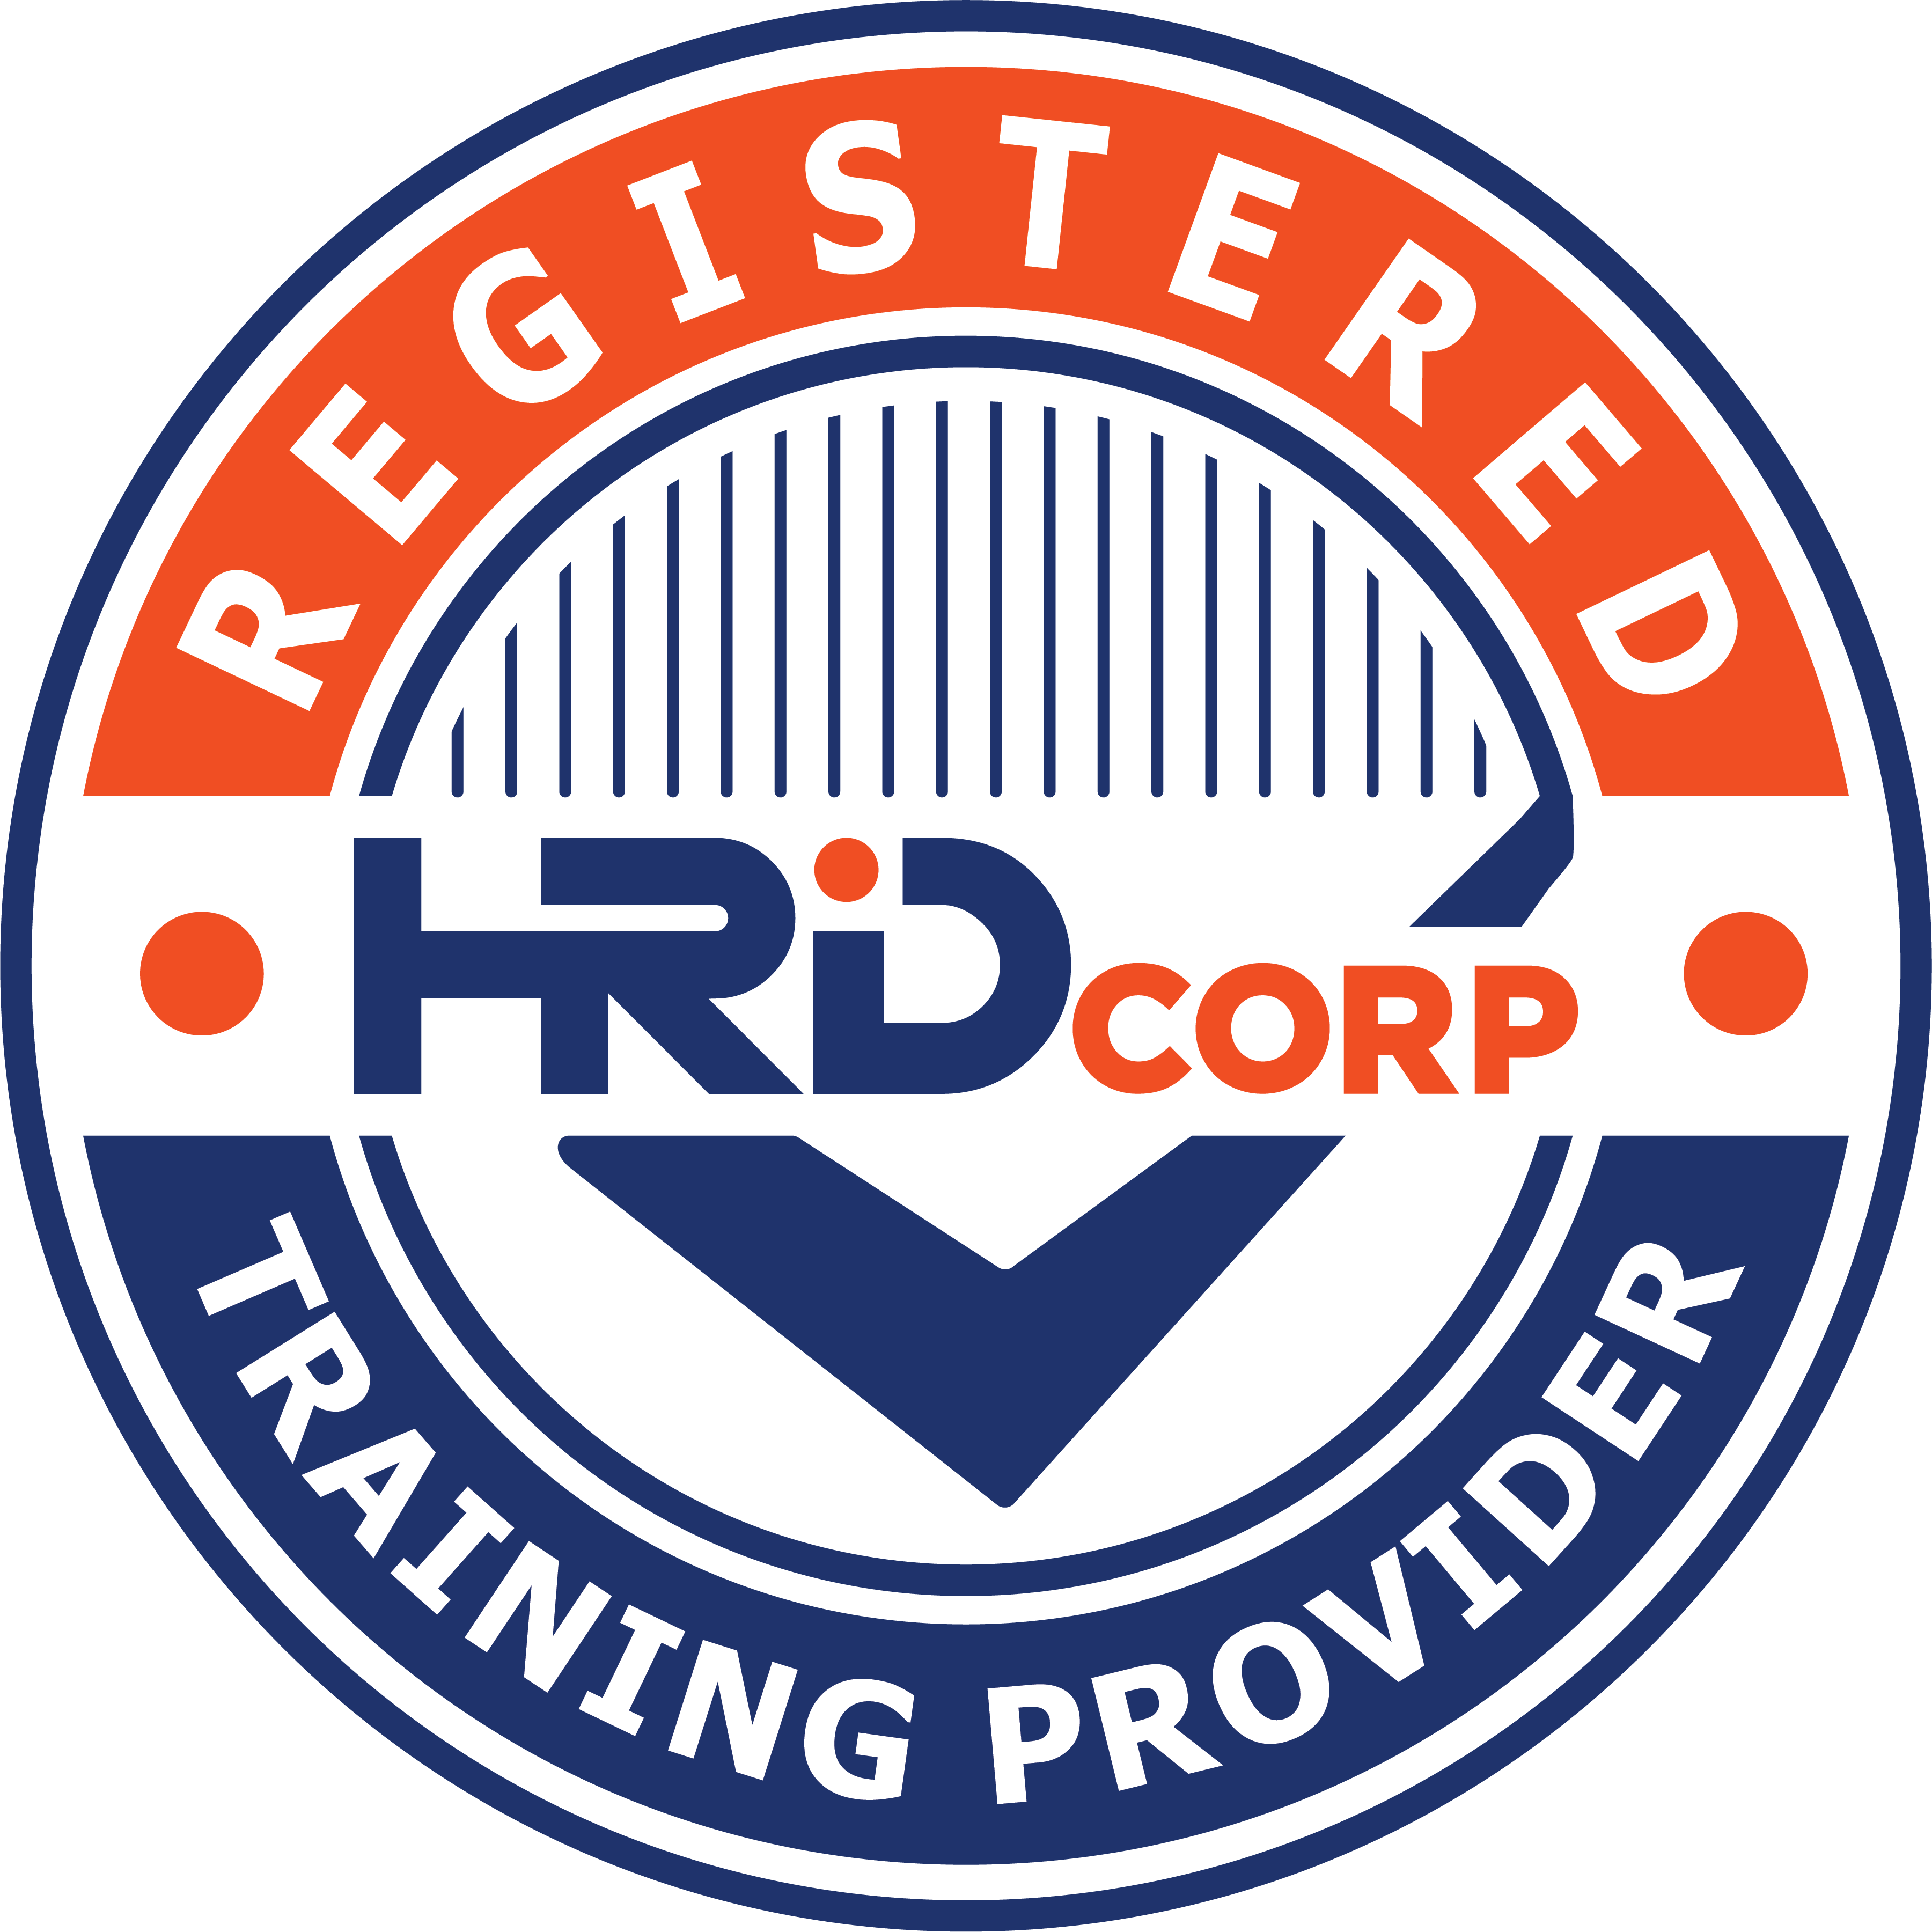 Logo_Training_Provider_Logo_Registered_Training_Provider WORLDWIDE-WIFI-EXPERTS is an approved company for HRD Corp claimable Wi-Fi training - World Wide WiFi Experts®